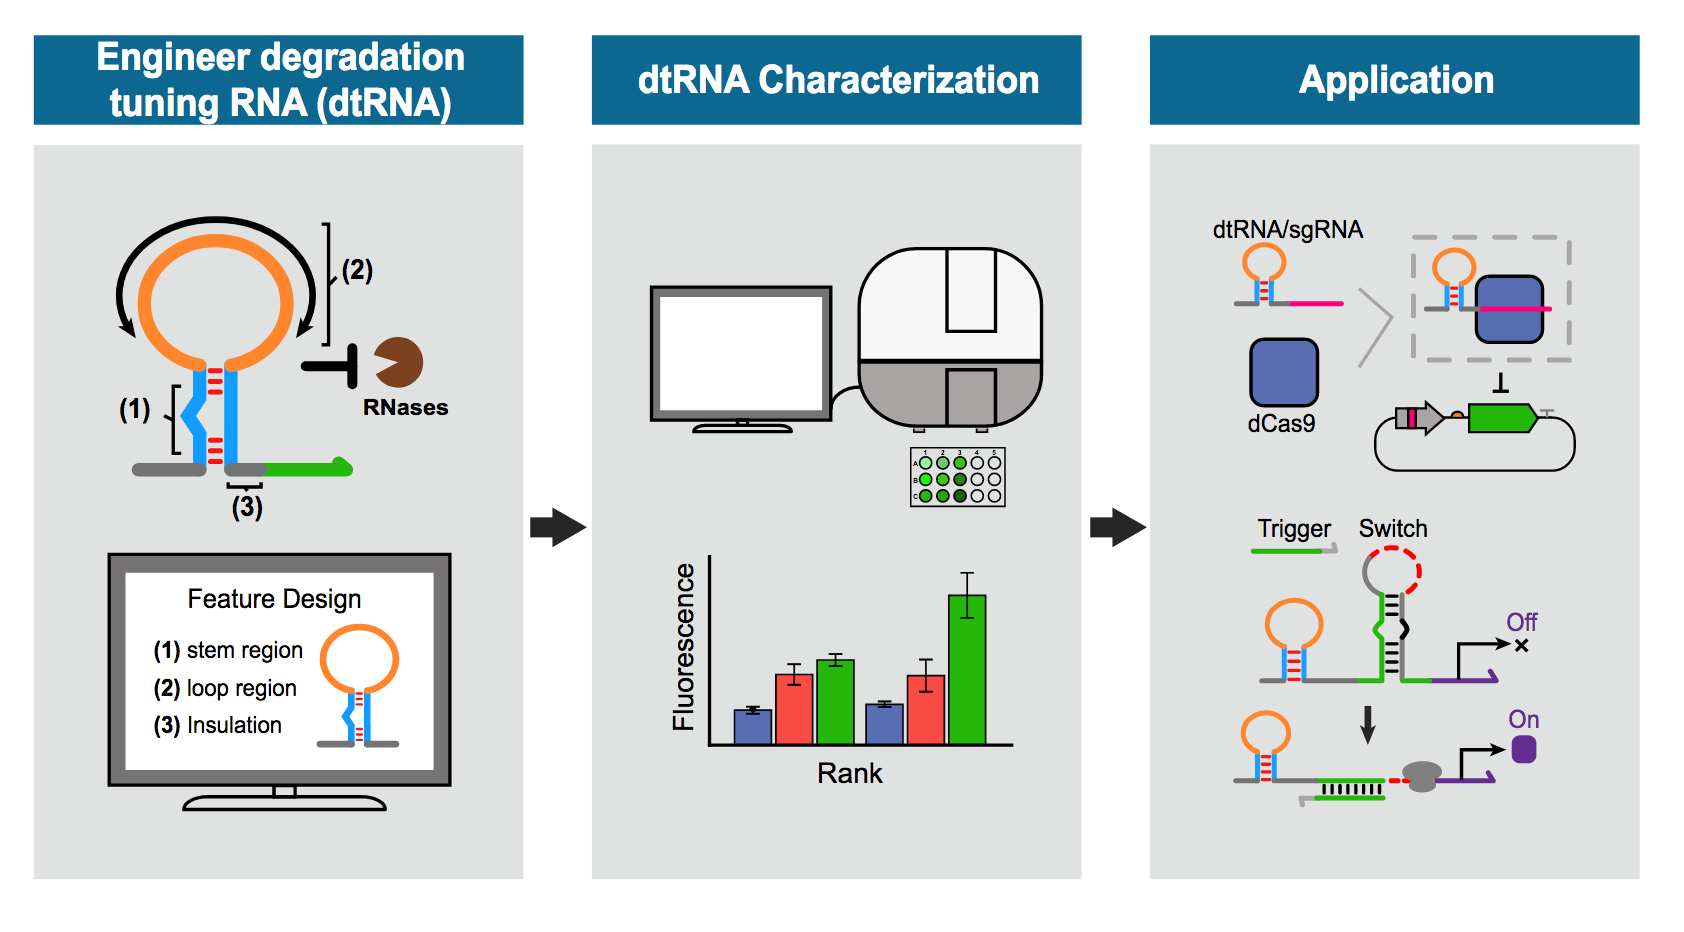 illustration shows engineering of degradation tuning RNAs by characterizing their structural features. 